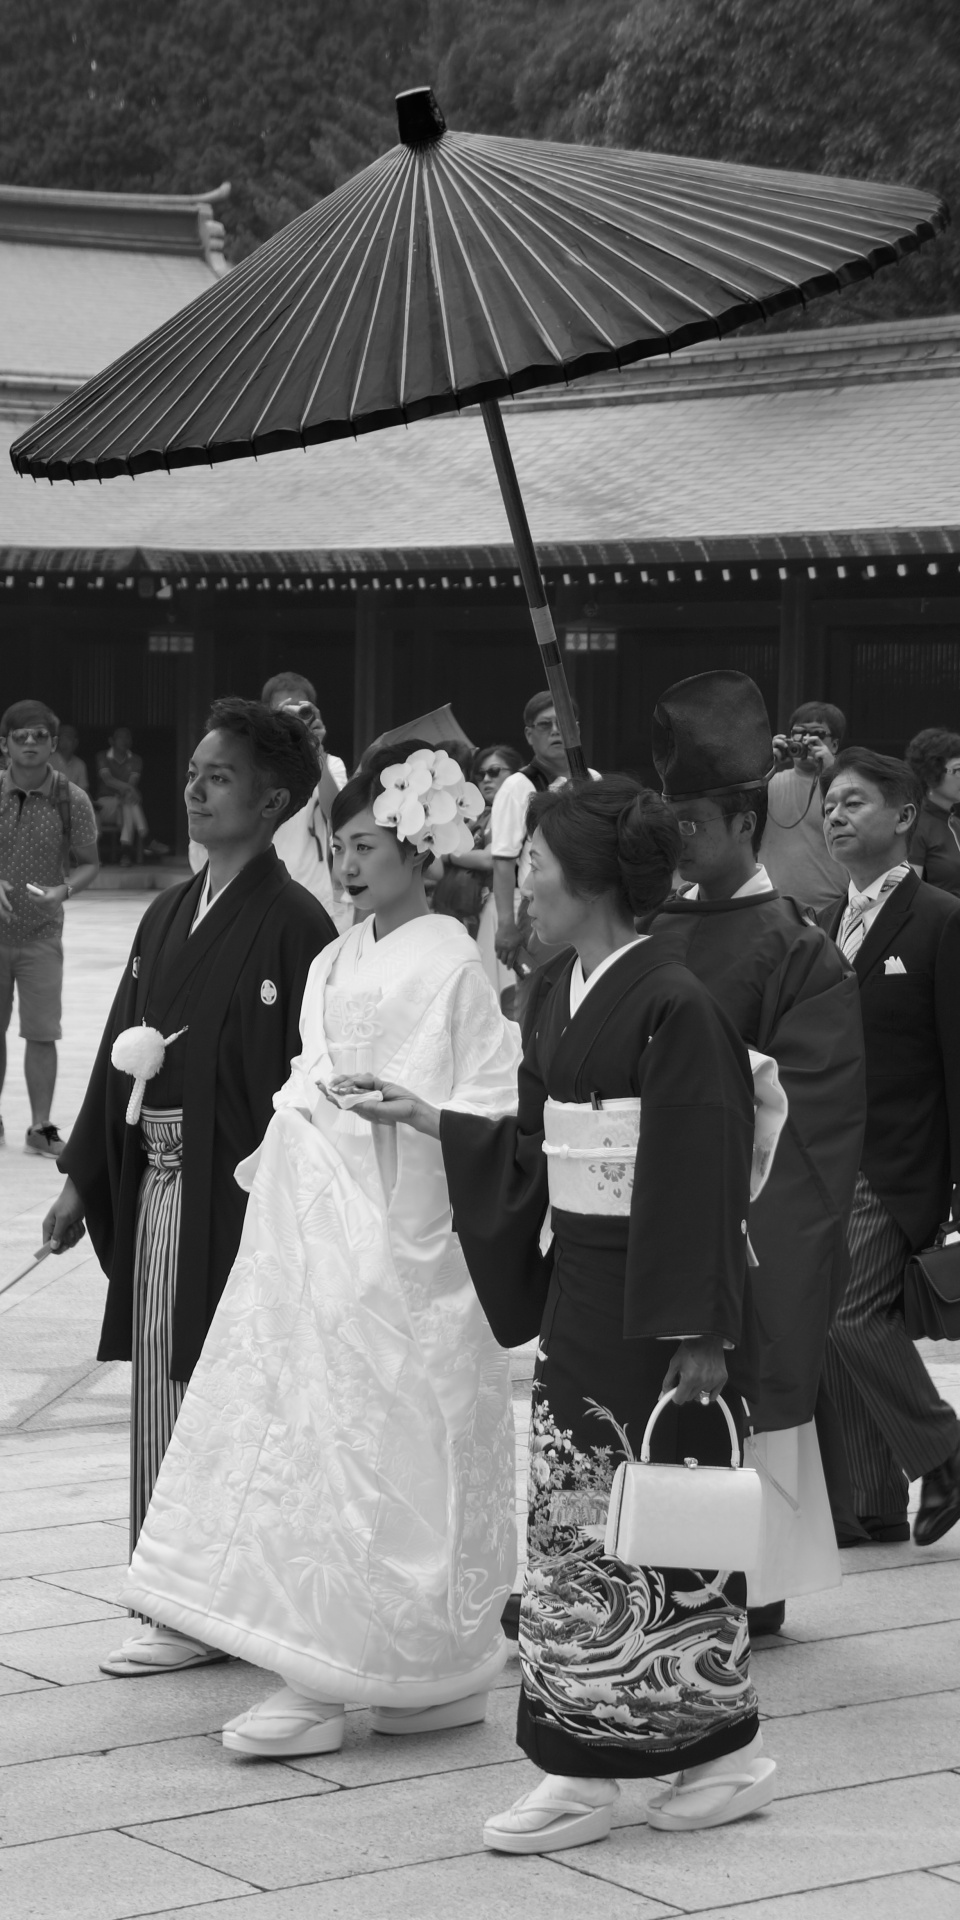 Traditional Japanese wedding ceremony at the famous Meiji Shrine in Tokyo, Japan.